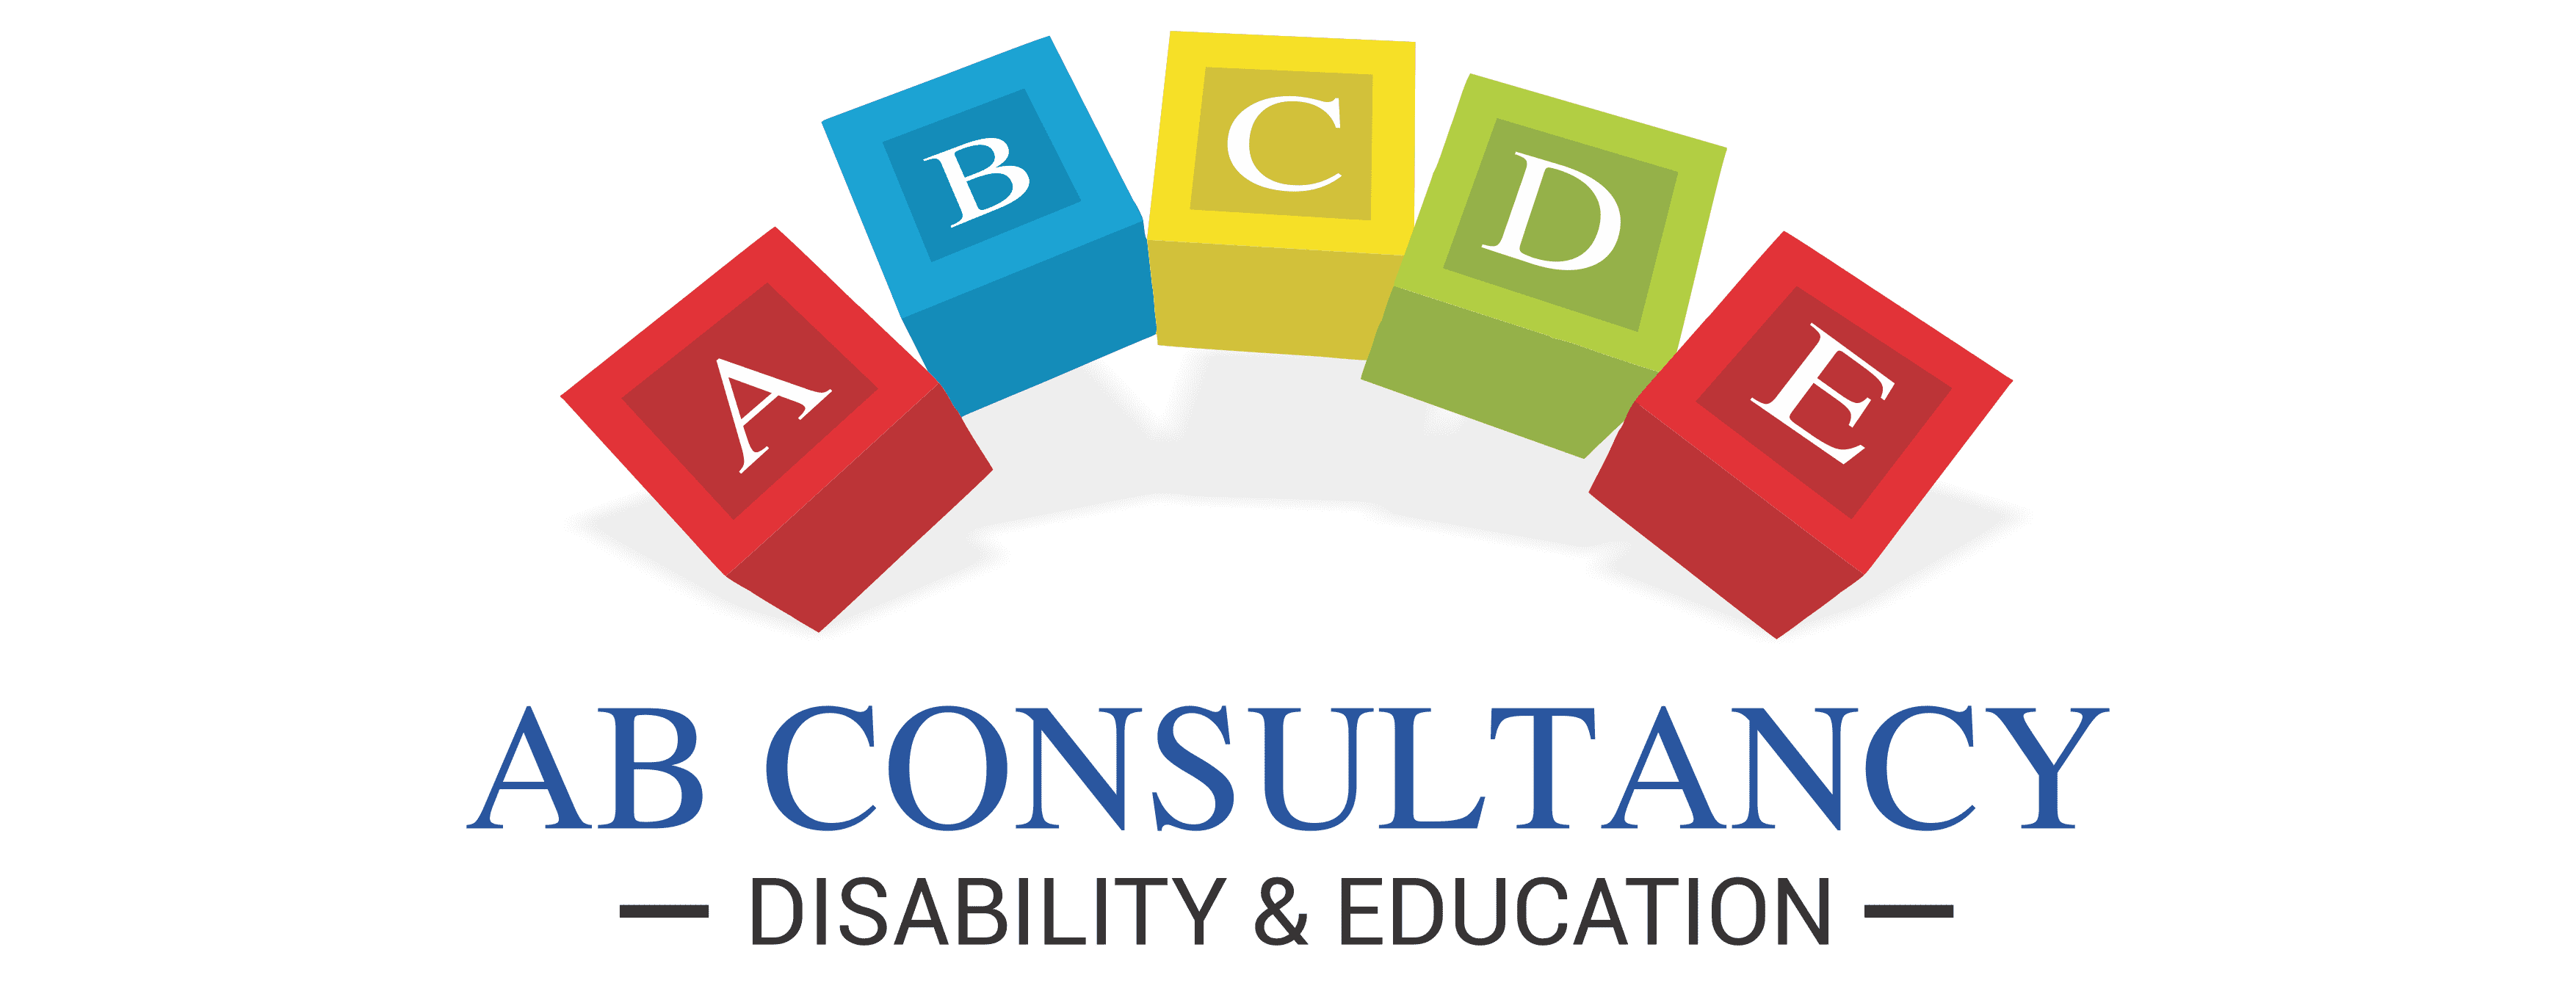 AB Consultancy Disability & Education